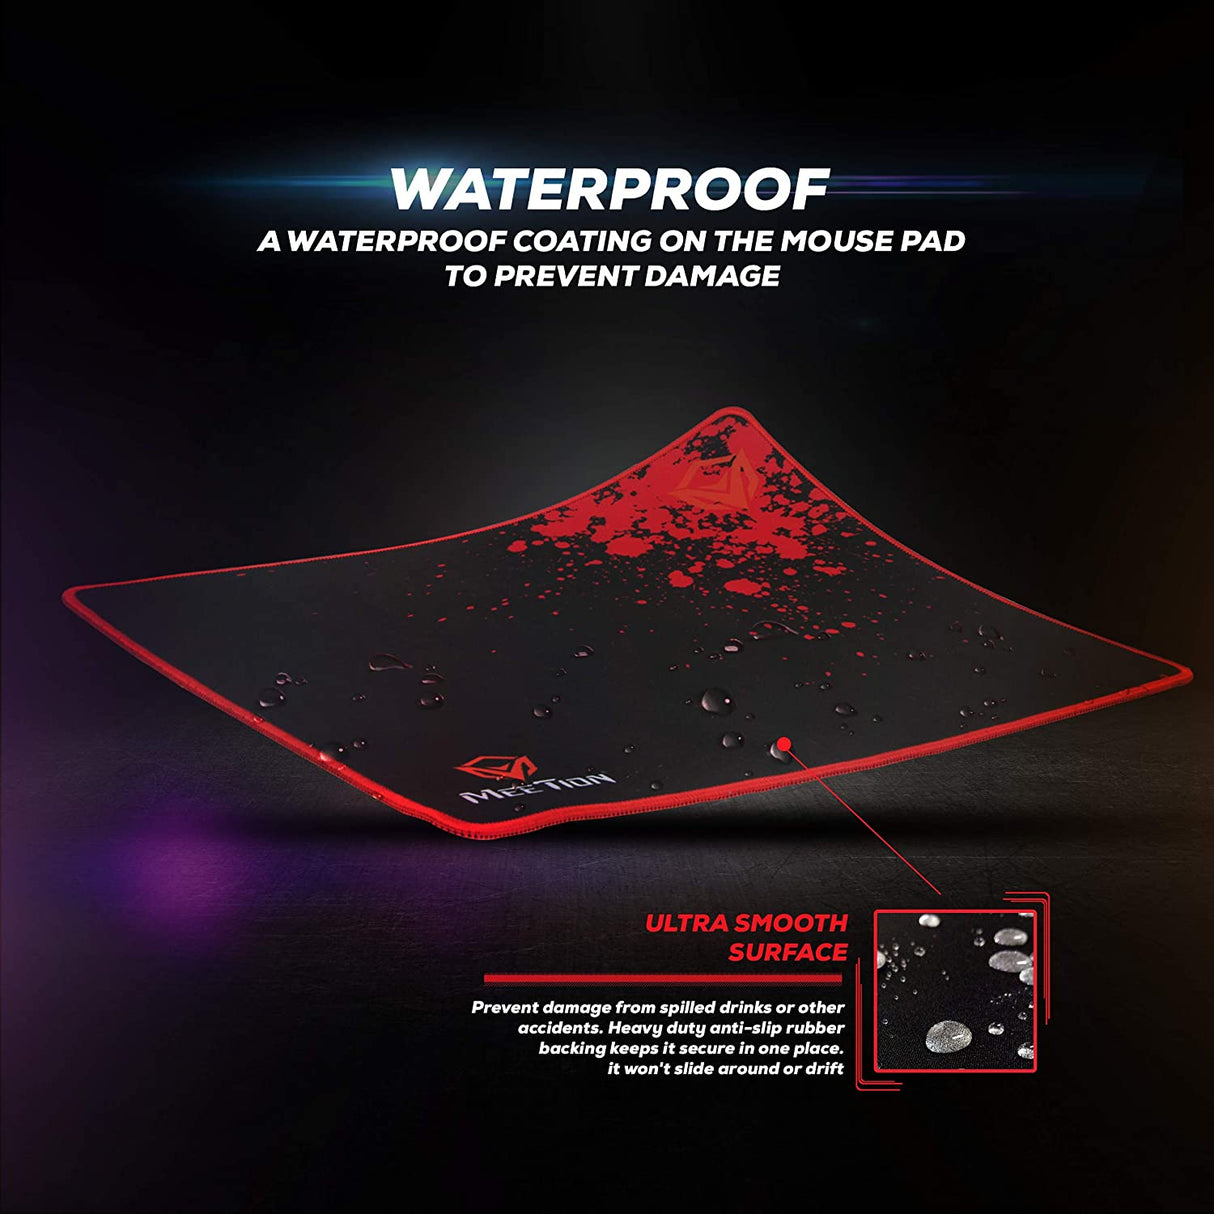 Meetion Non-slip Rubber Square Mouse Pad P110 - Level UpMeetion6970344731370